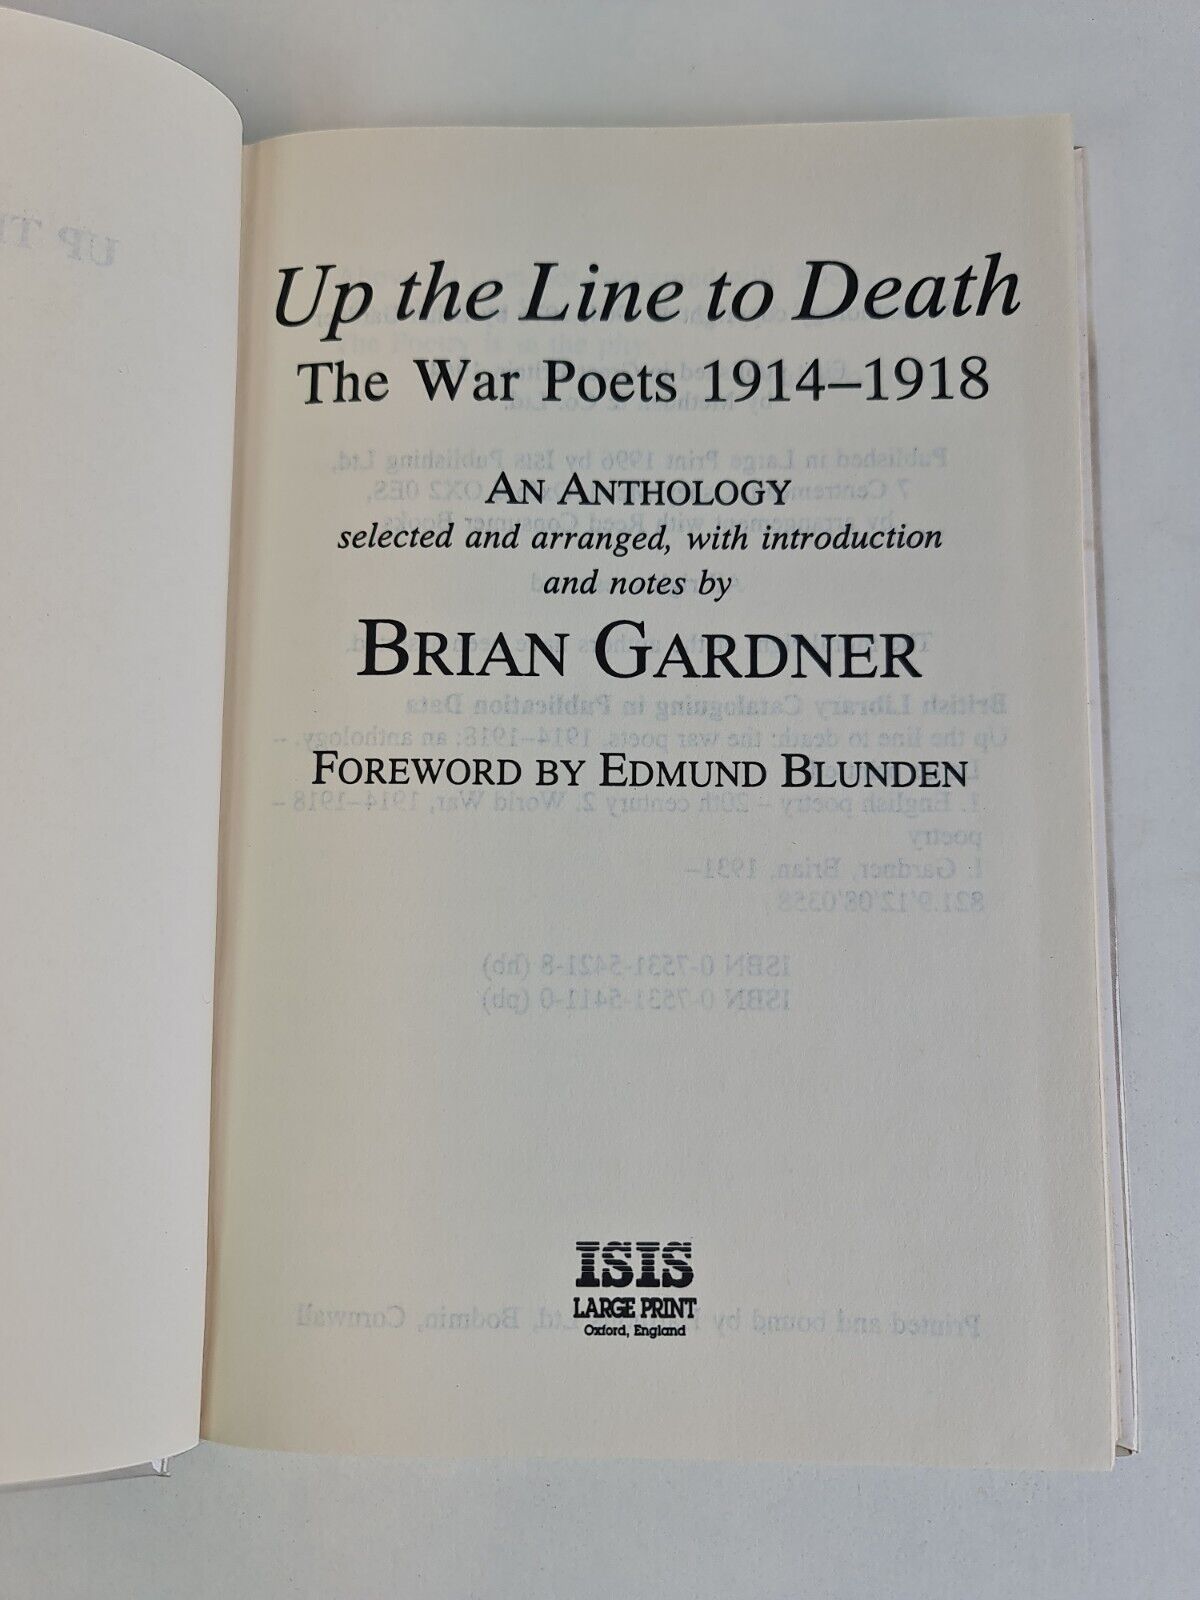 Up the Line to Death: War Poets, 1914-18 by B Gardner (1996 - ISIS Large Print)